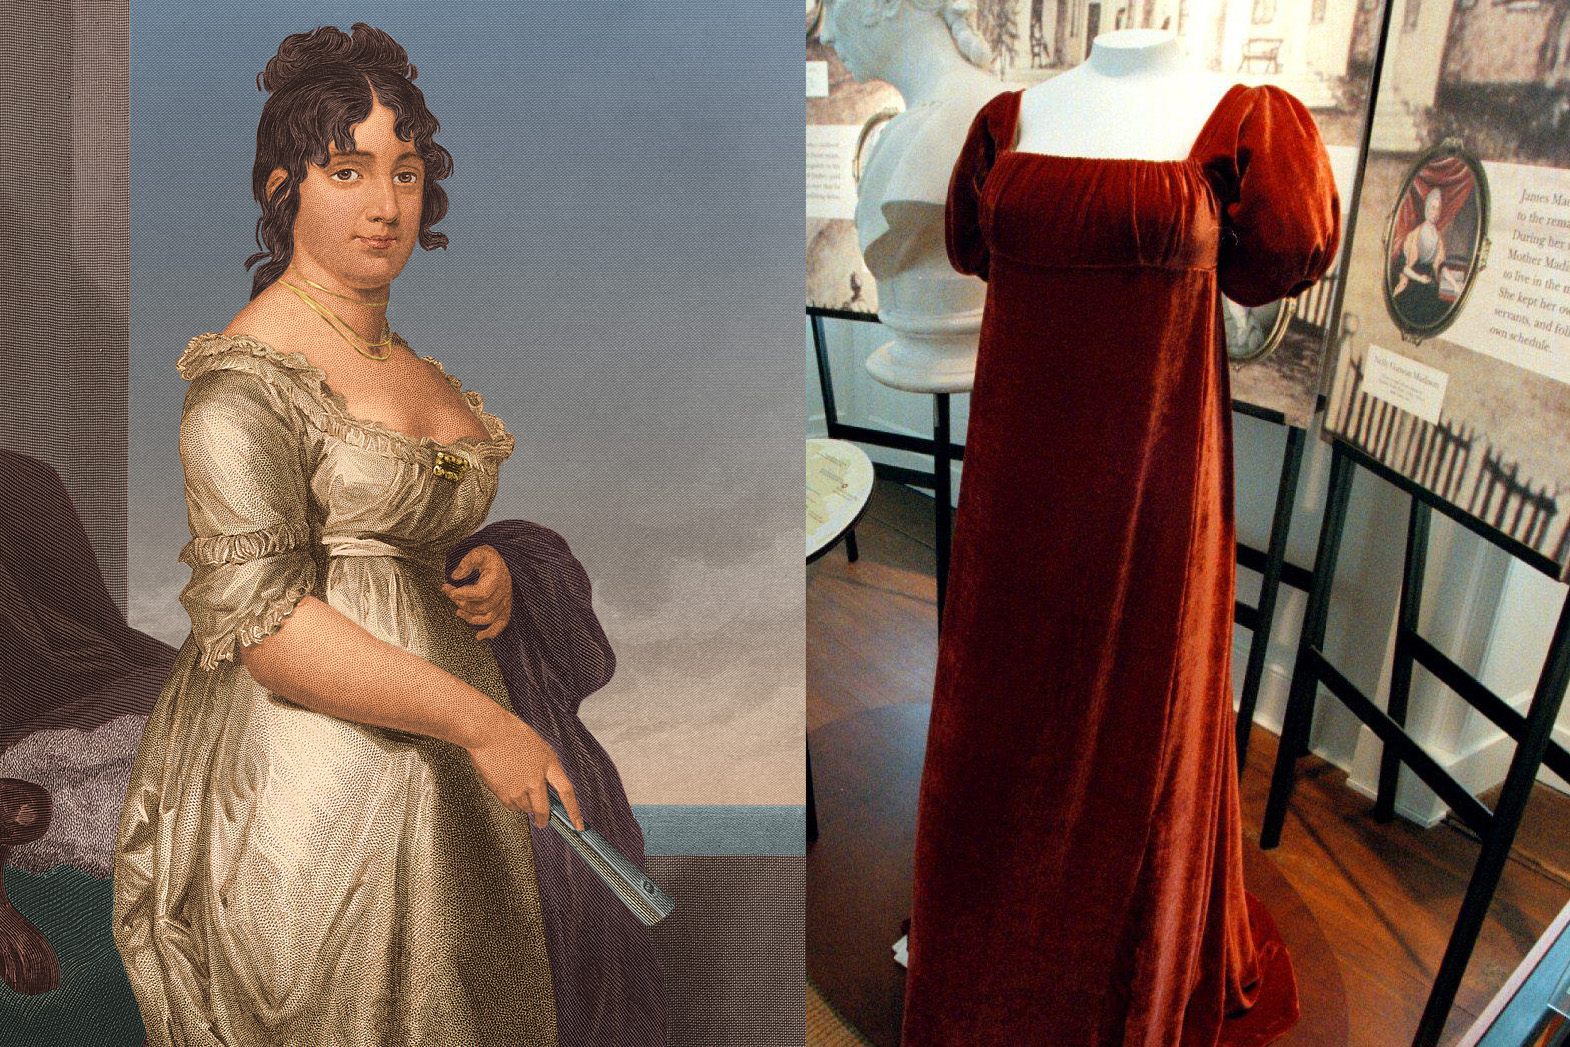 Left: A portrait of Dolly Madison, circa 1800; right: Dolly Madison's famous red dress on display at the home on James Madison in Montpelier, Va.